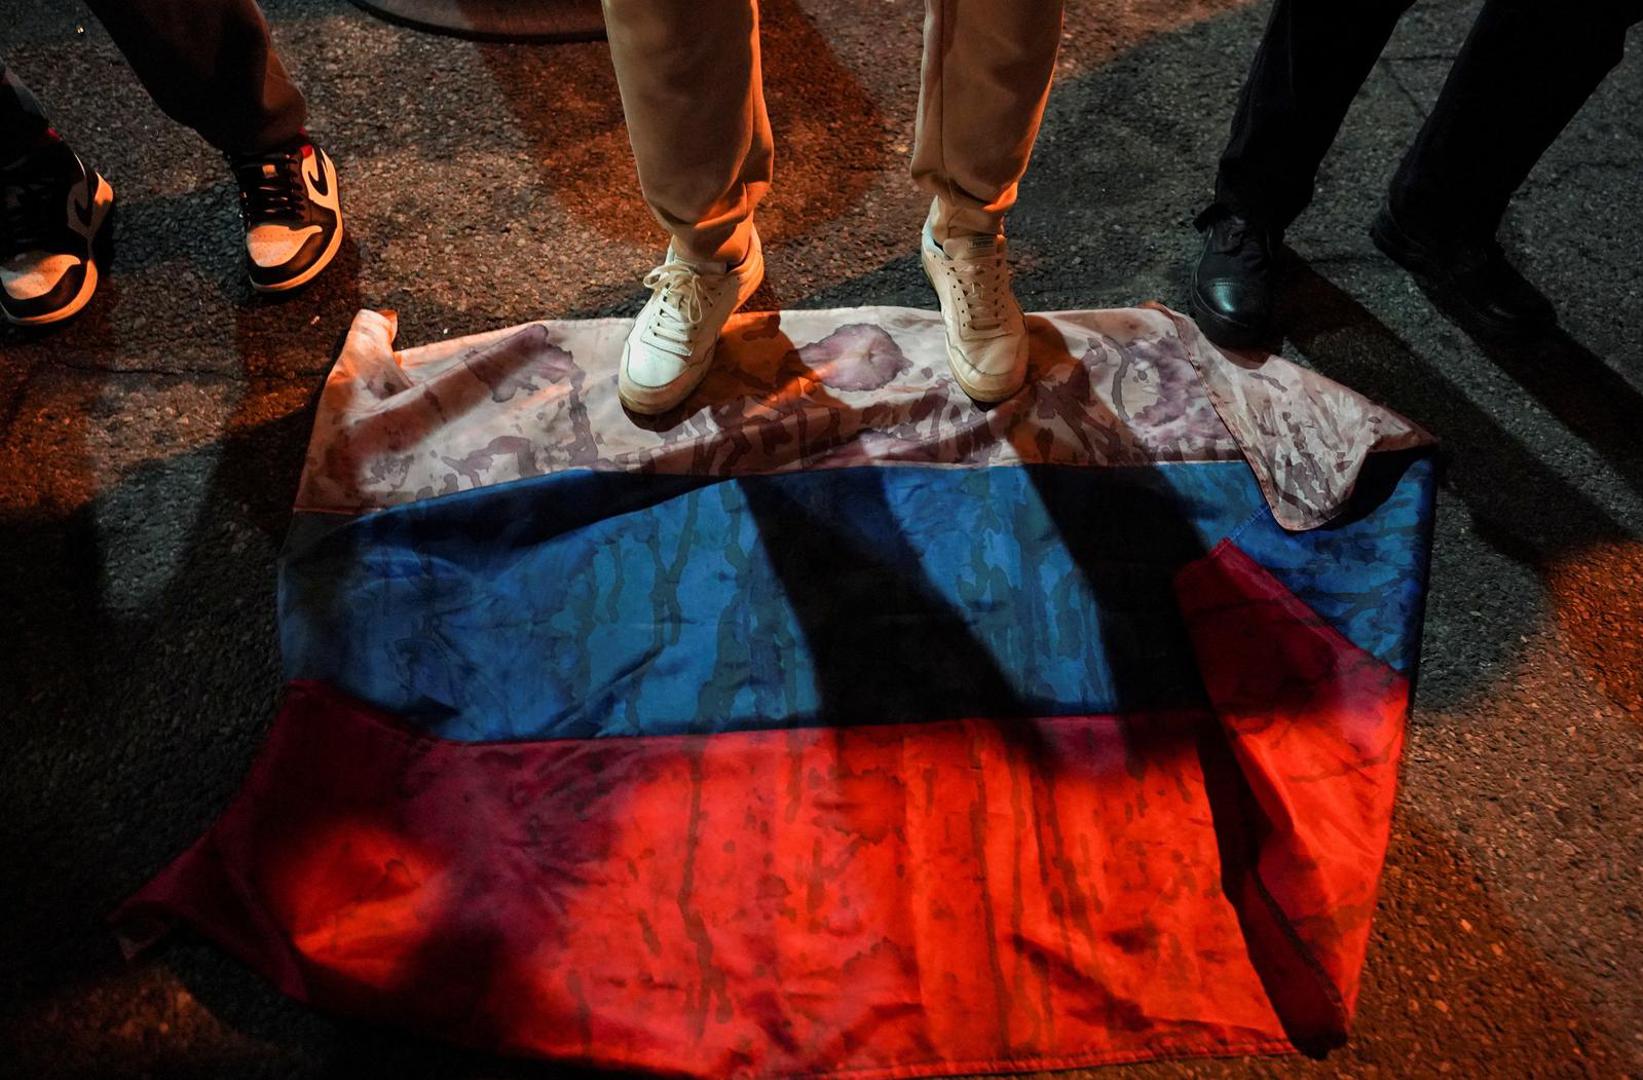 Demonstrators step on a Russian flag during "The Year of Terror: Russians Against the War" rally to show their support for Ukraine on the eve of the war's anniversary, outside the Russian Consulate in New York City, New York, U.S., February 23, 2023.  REUTERS/David 'Dee' Delgado Photo: David Dee Delgado/REUTERS